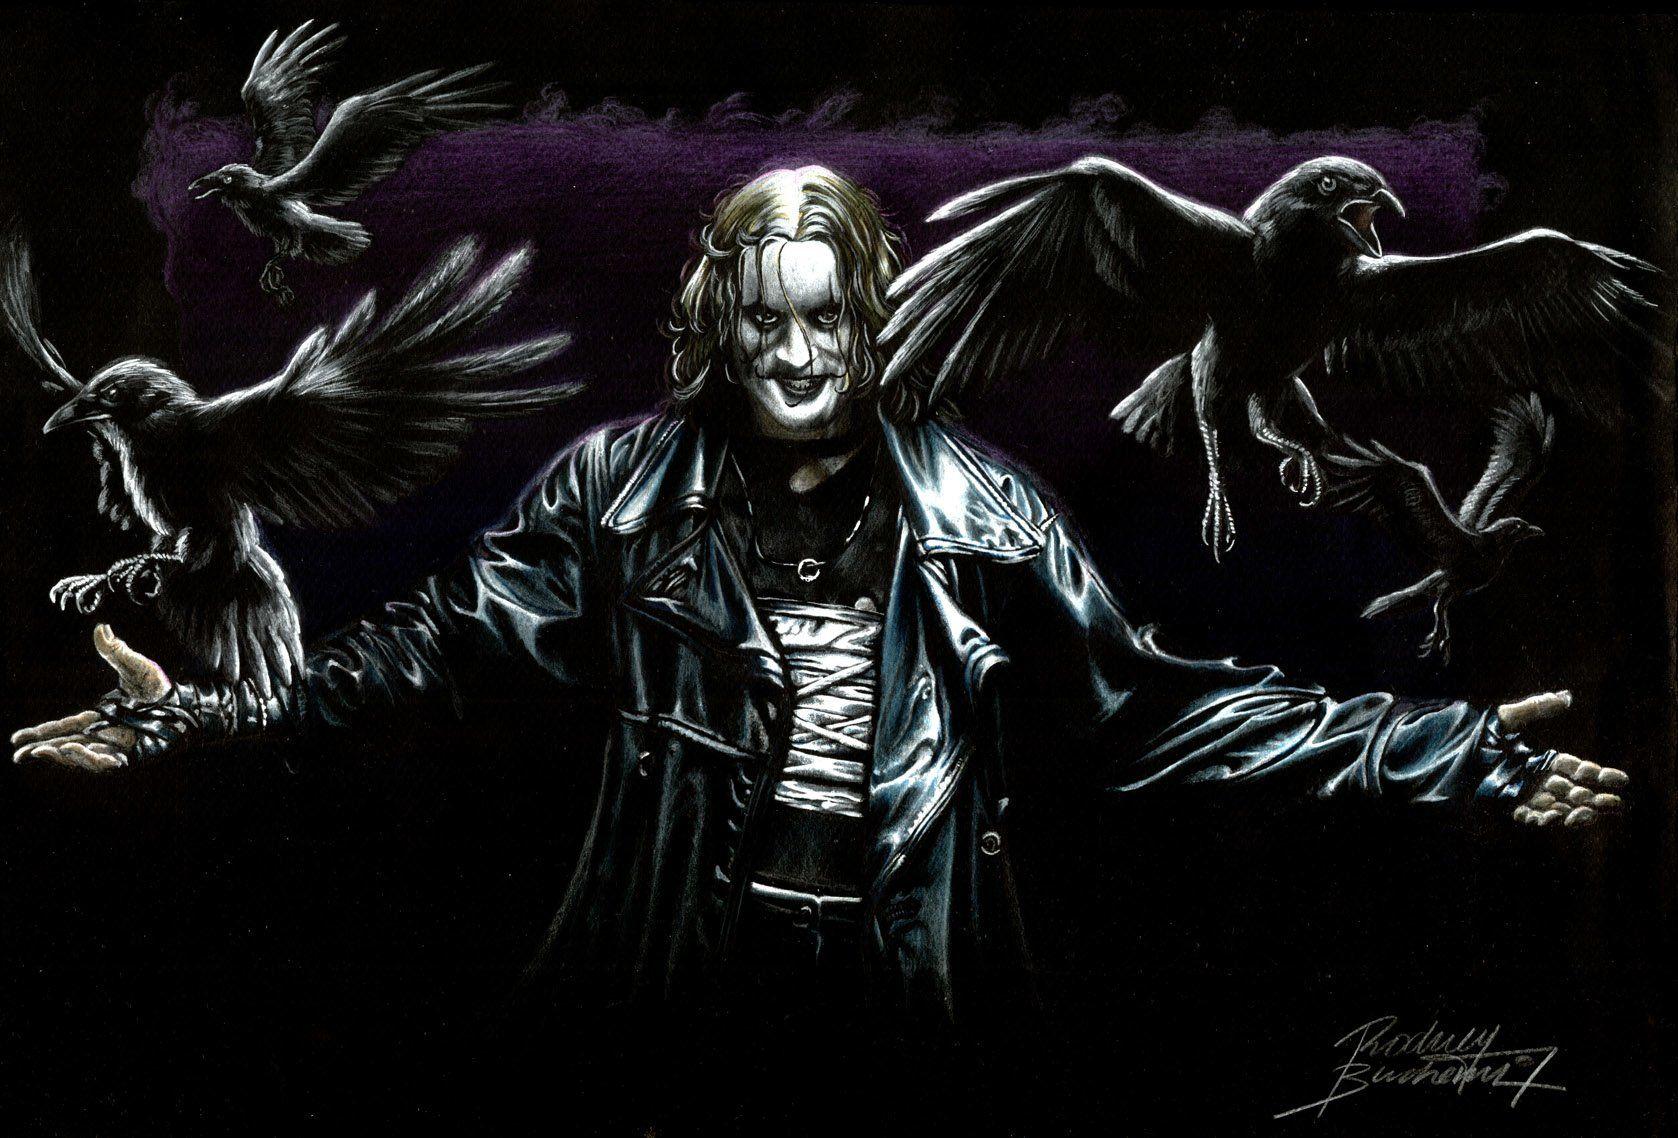 The Crow wallpaper by WildHuntress on DeviantArt